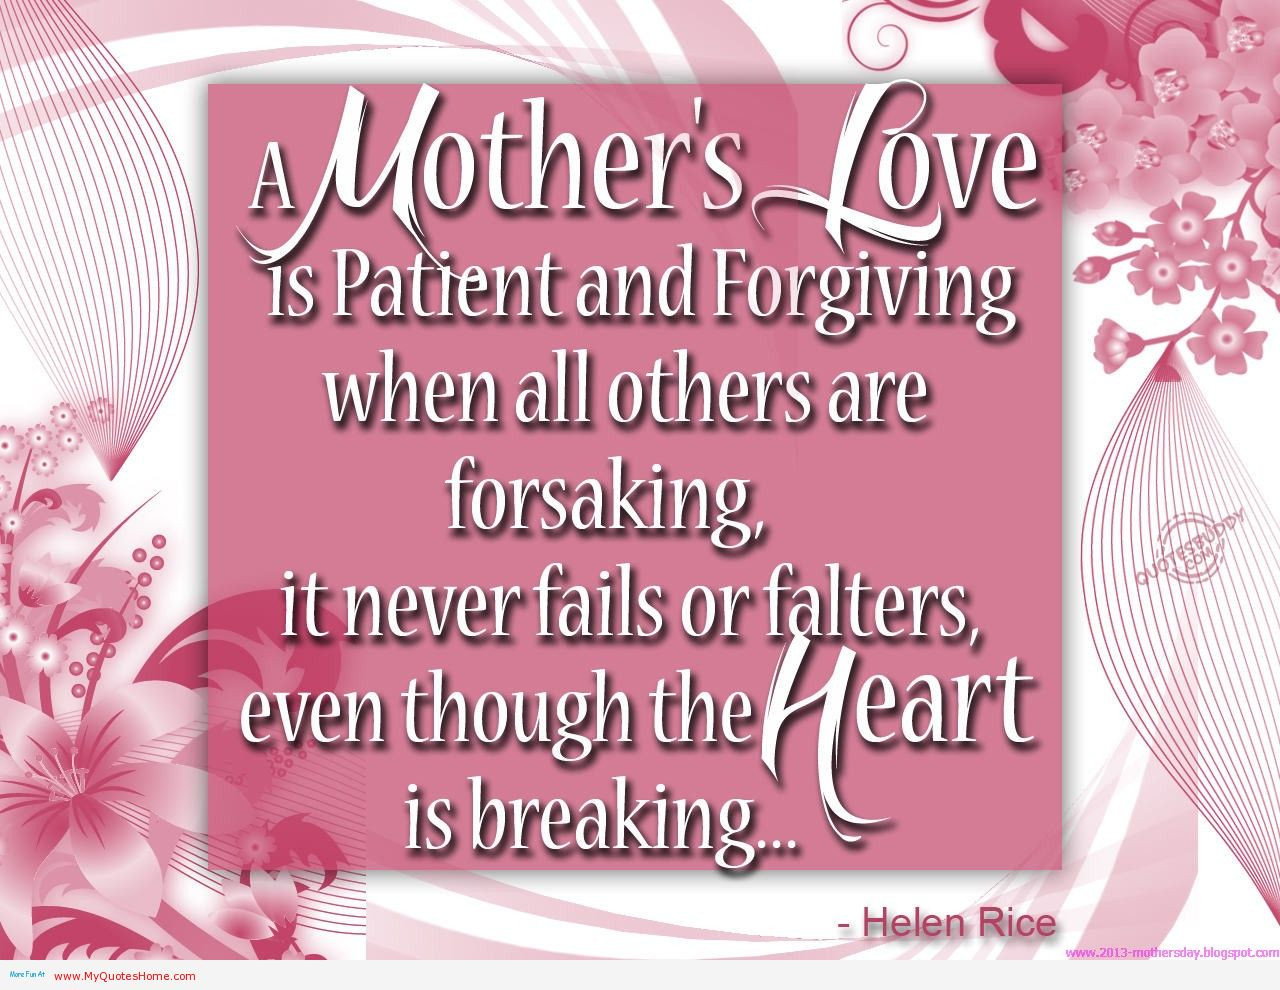 Sister Mothers Day Quotes
 Mothers Day Quotes For Sisters QuotesGram